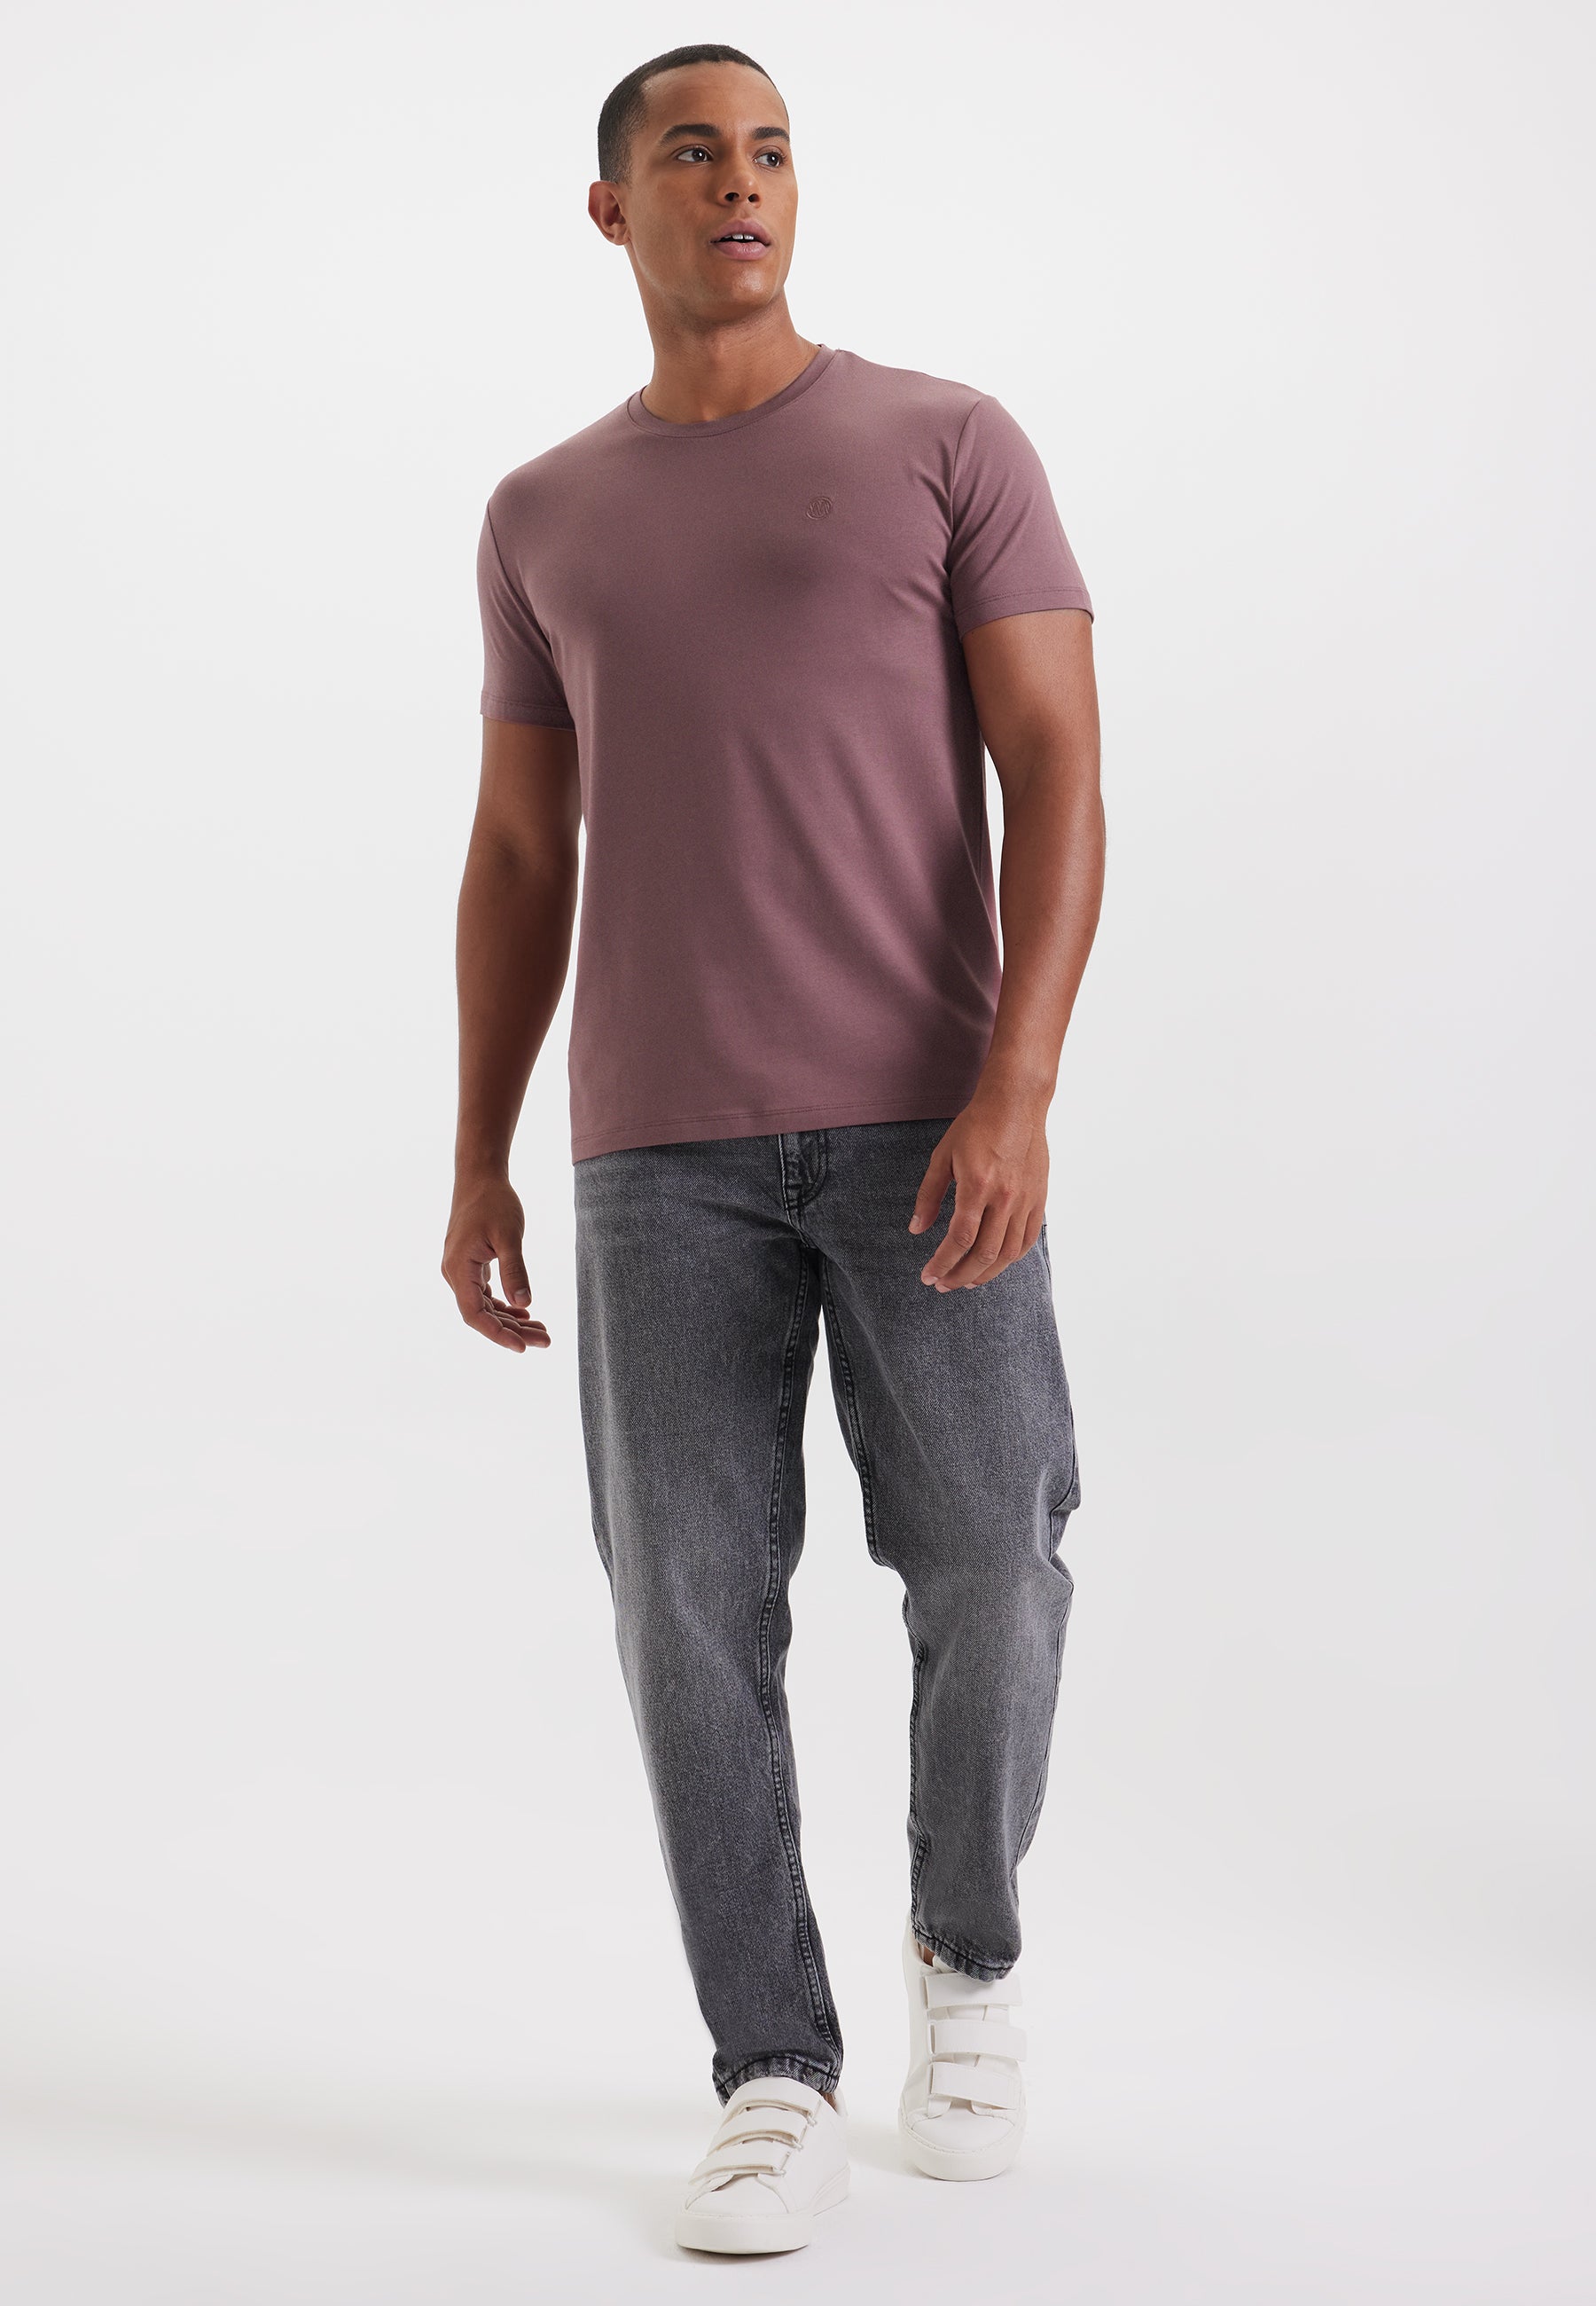 PARKER O-NECK TEE in Wine